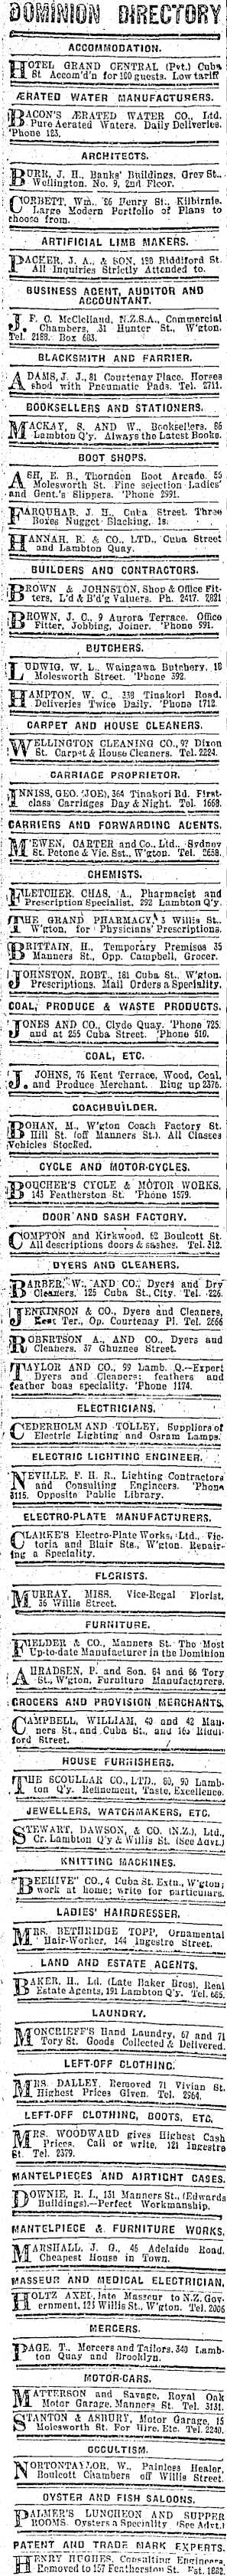 Papers Past Newspapers Dominion 12 May 1910 Page 2 Advertisements Column 1